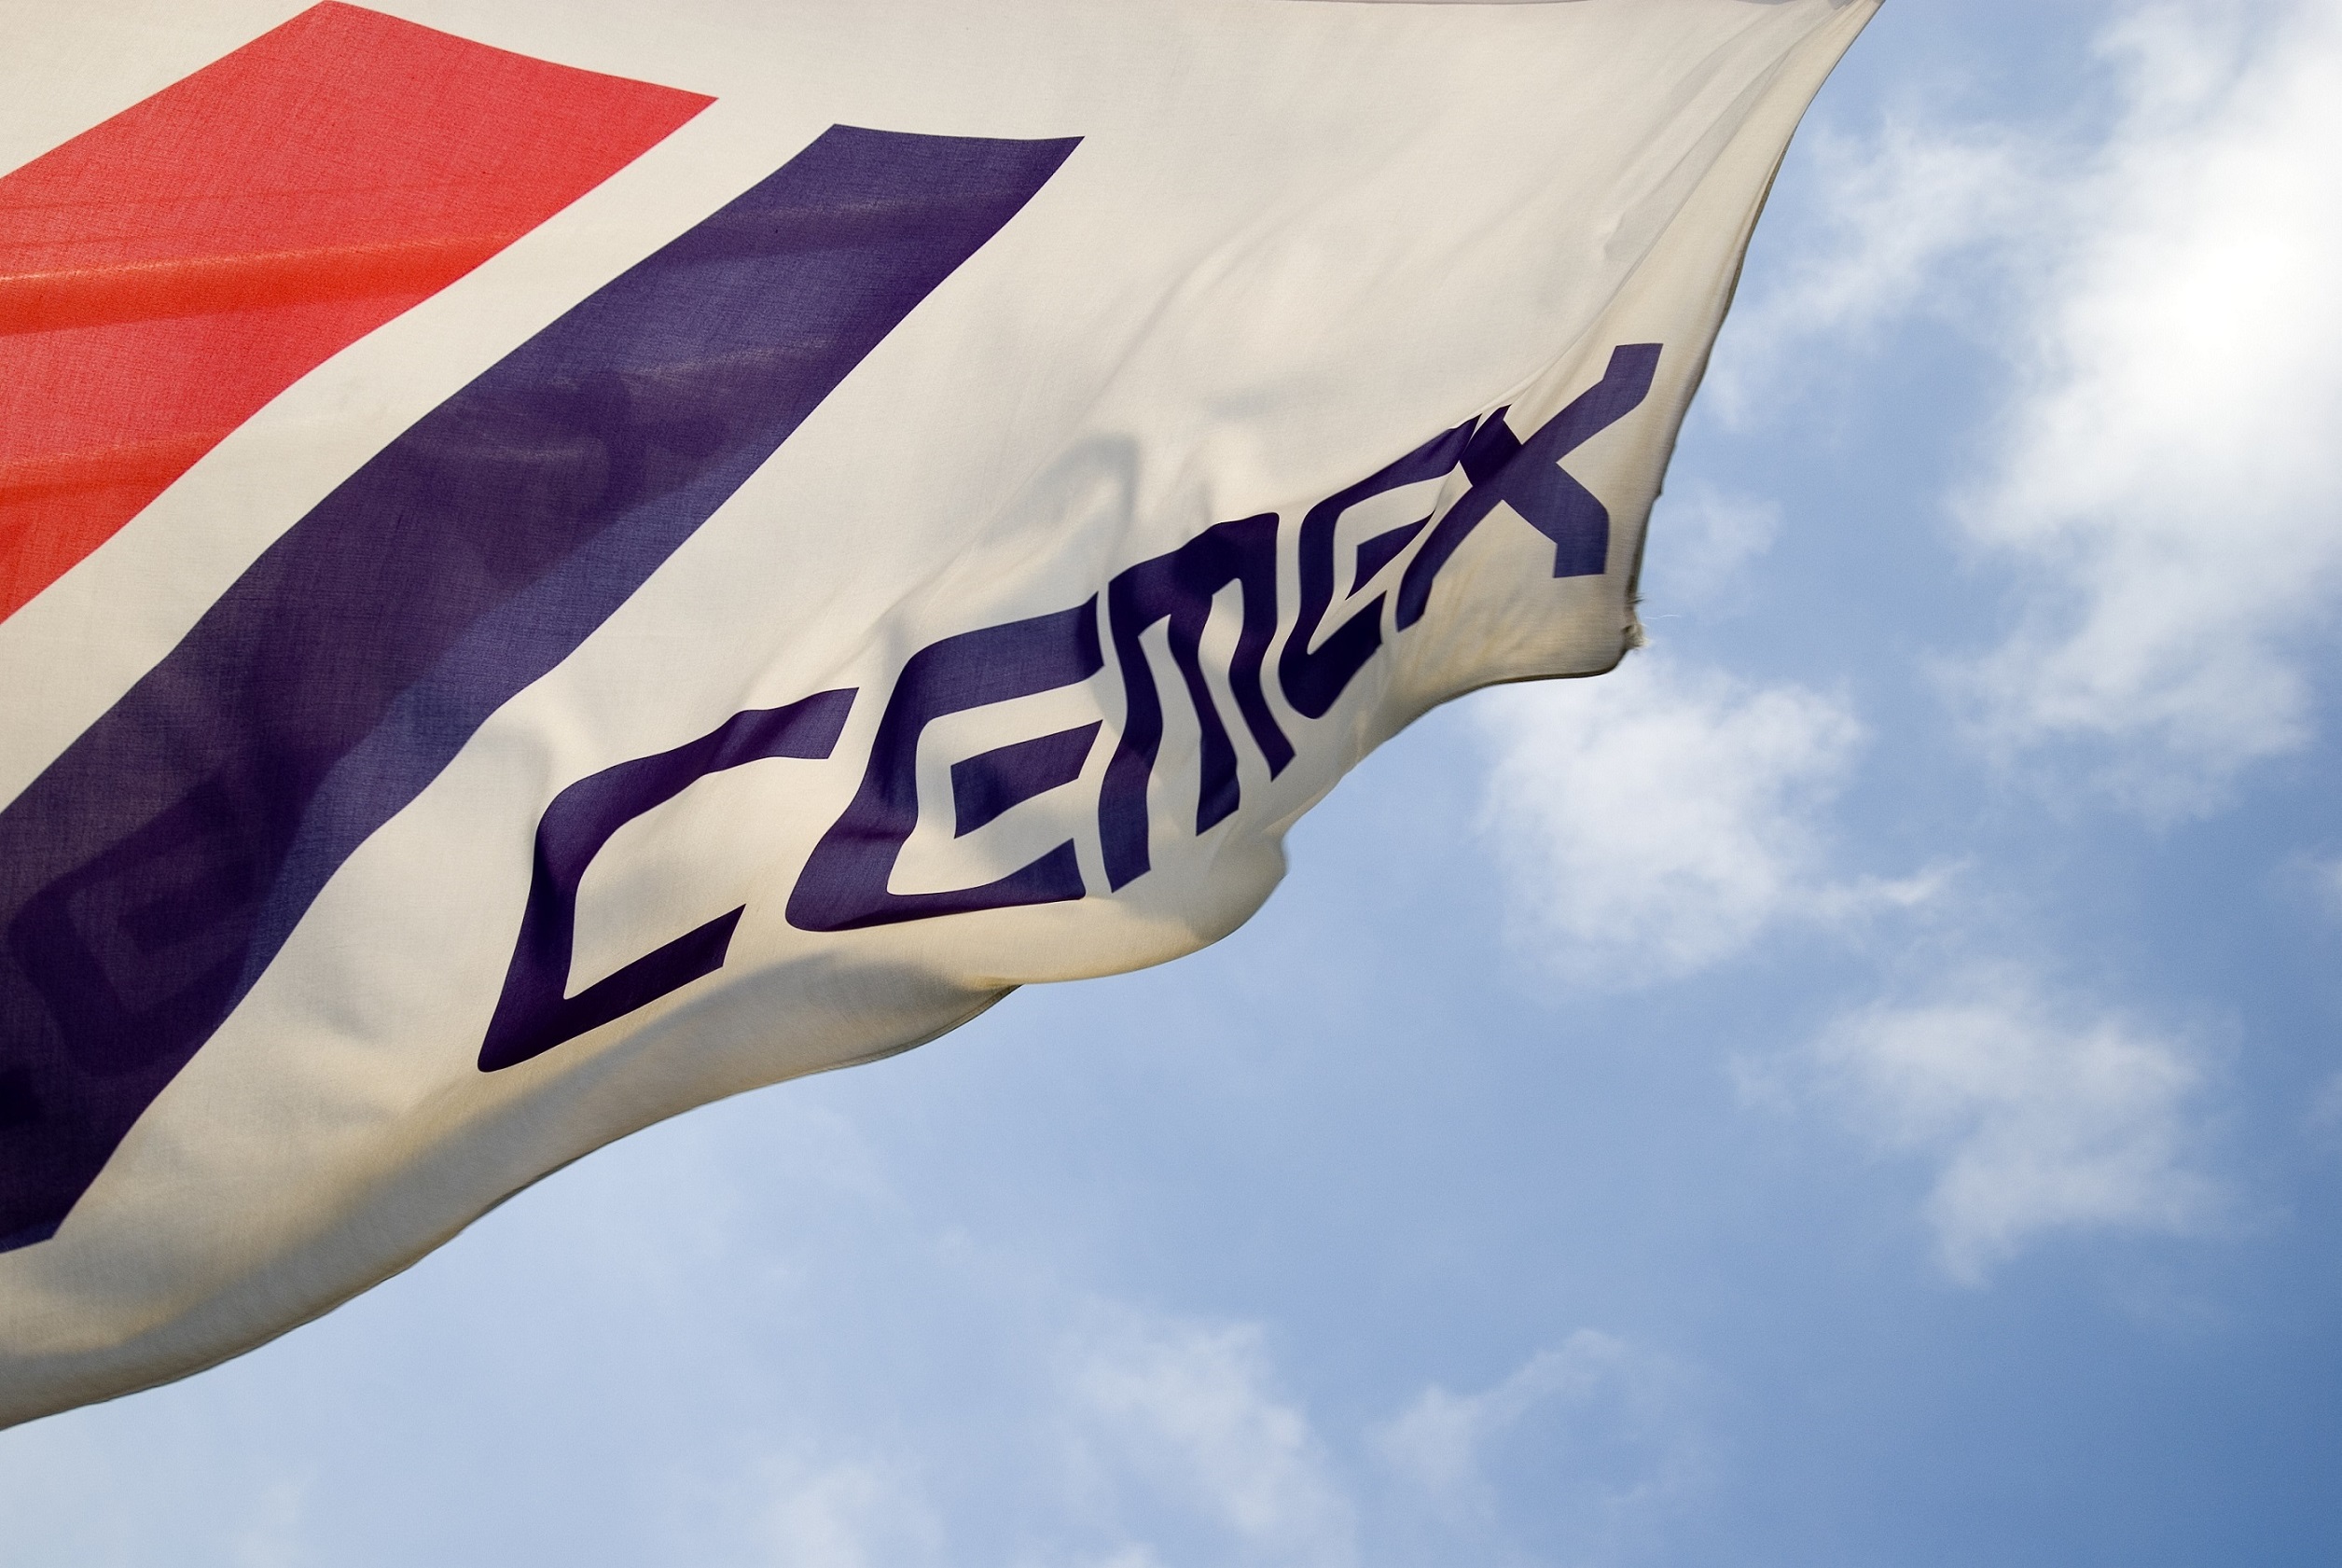  The divested CEMEX assets include a cement plant, grinding station, ready-mix plants and an aggregate quarry